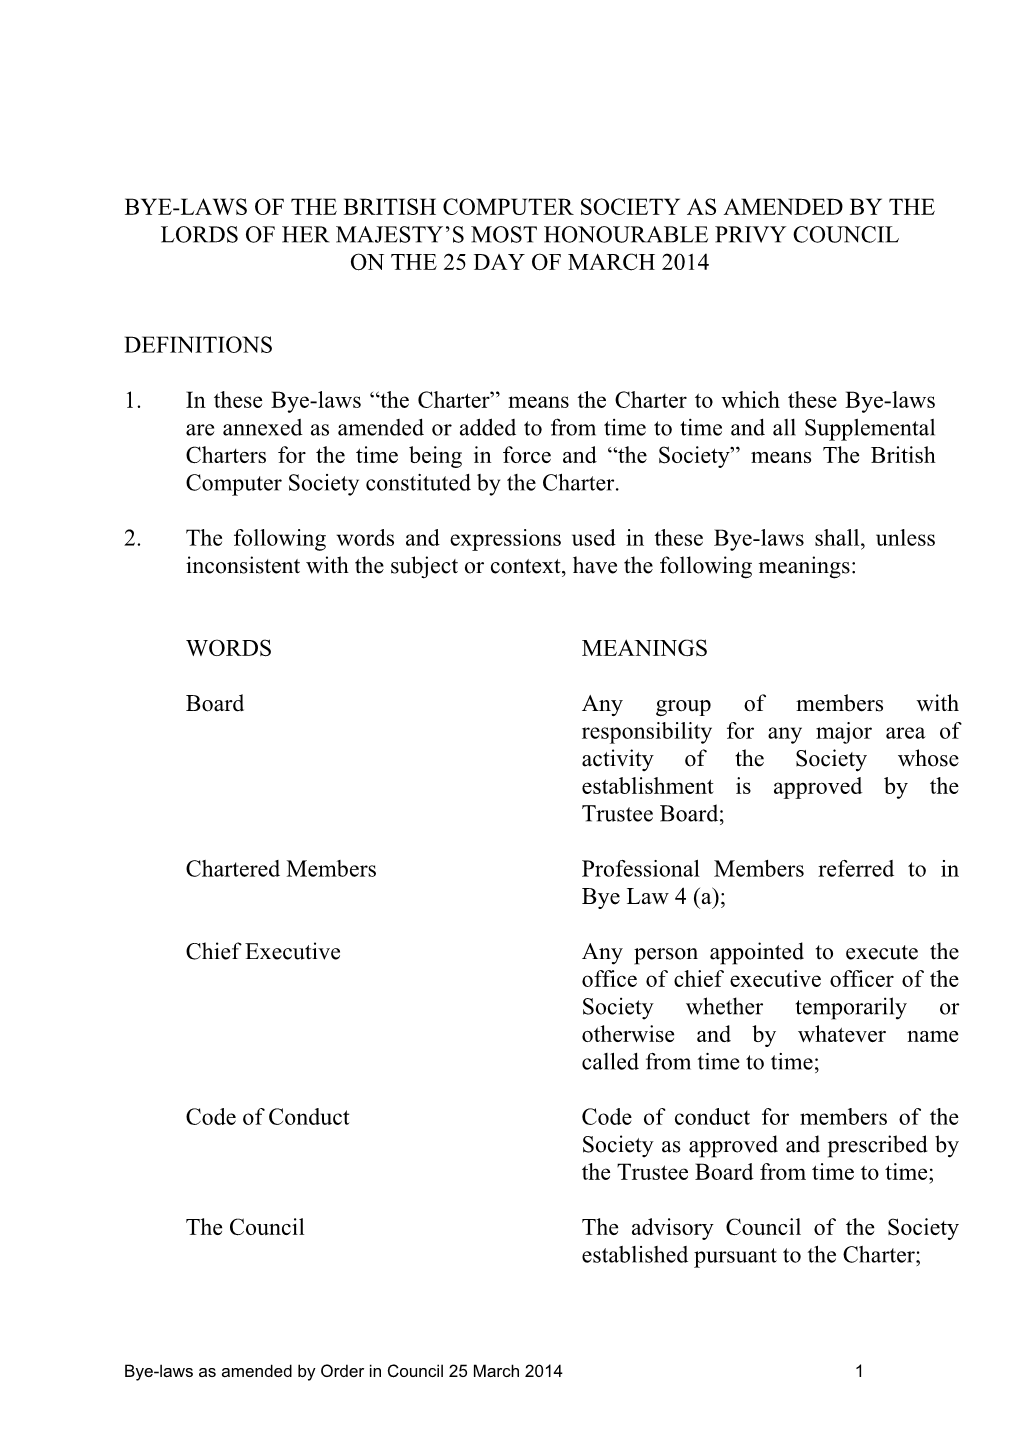 Bye-Laws of the British Computer Society As Amended by the Lords of Her Majesty’S Most Honourable Privy Council on the 25 Day of March 2014